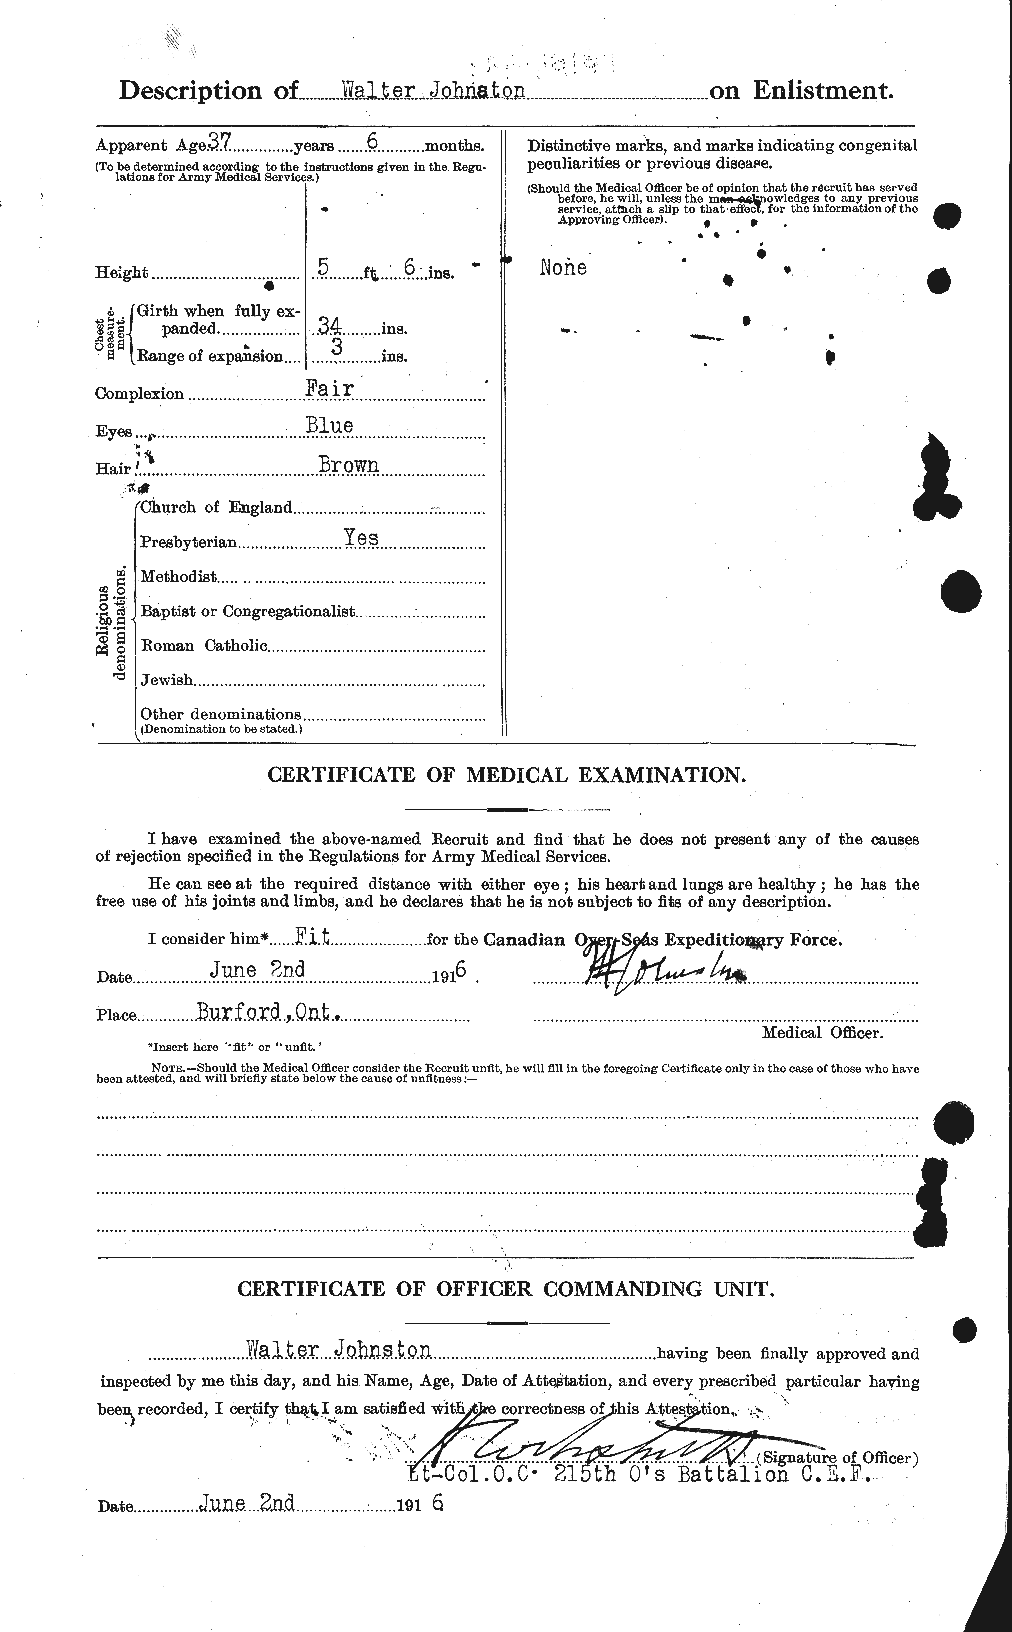 Personnel Records of the First World War - CEF 427201b